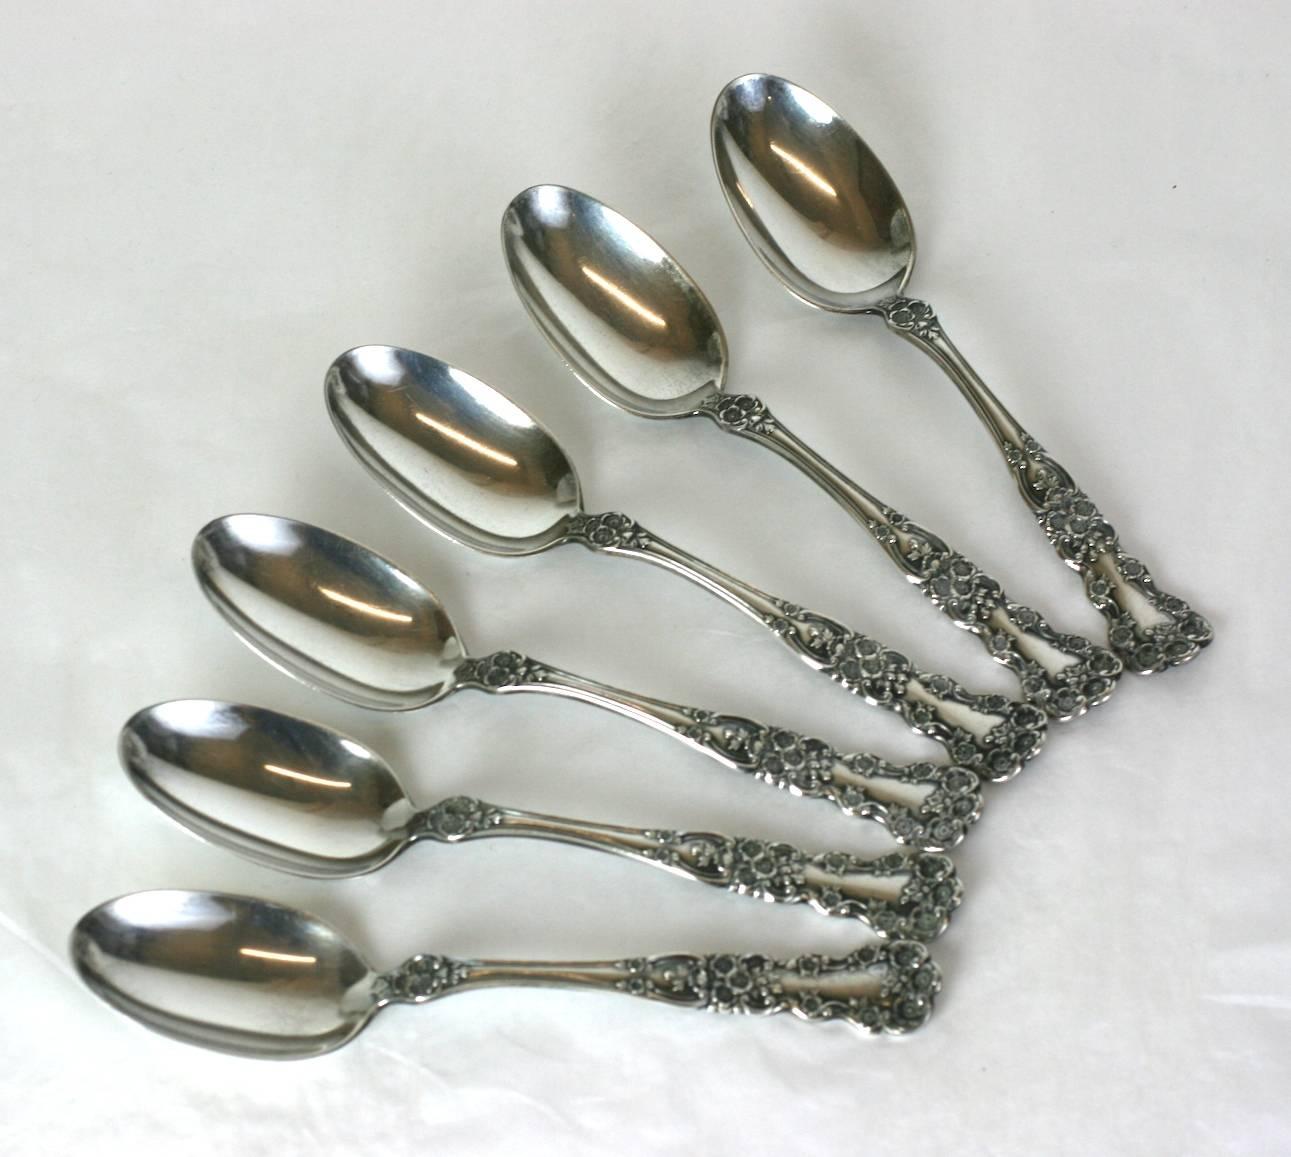 Set of Victorian Gorham sterling spoons in original box. Foliate patterned from the late 19th century. Set of six tea spoons, each measuring 6